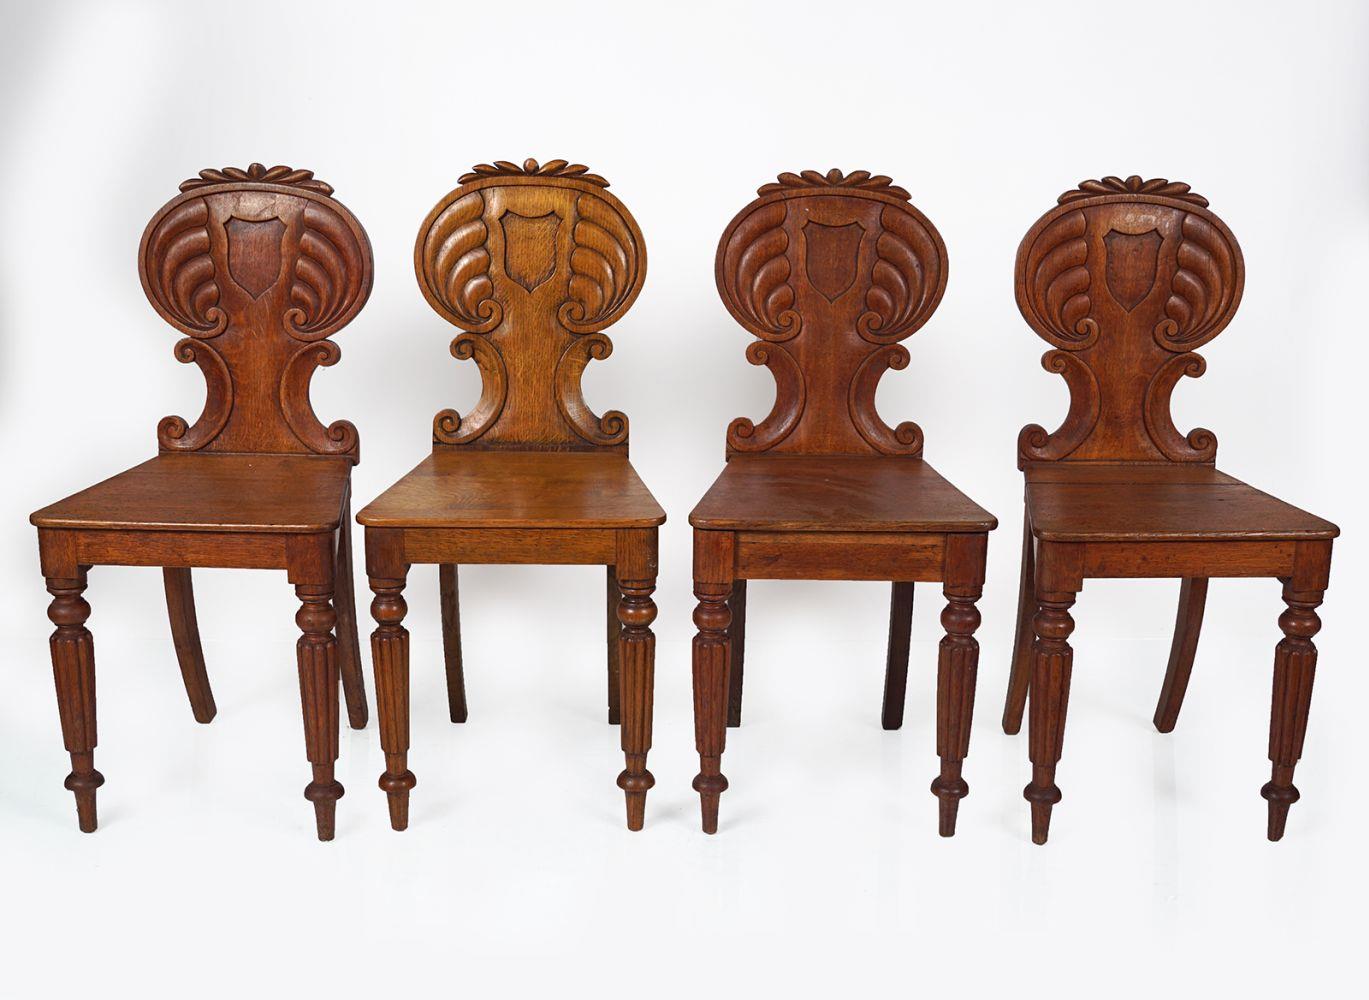 SUITE OF 4 WILLIAM IV OAK HALL CHAIRS - Image 2 of 5